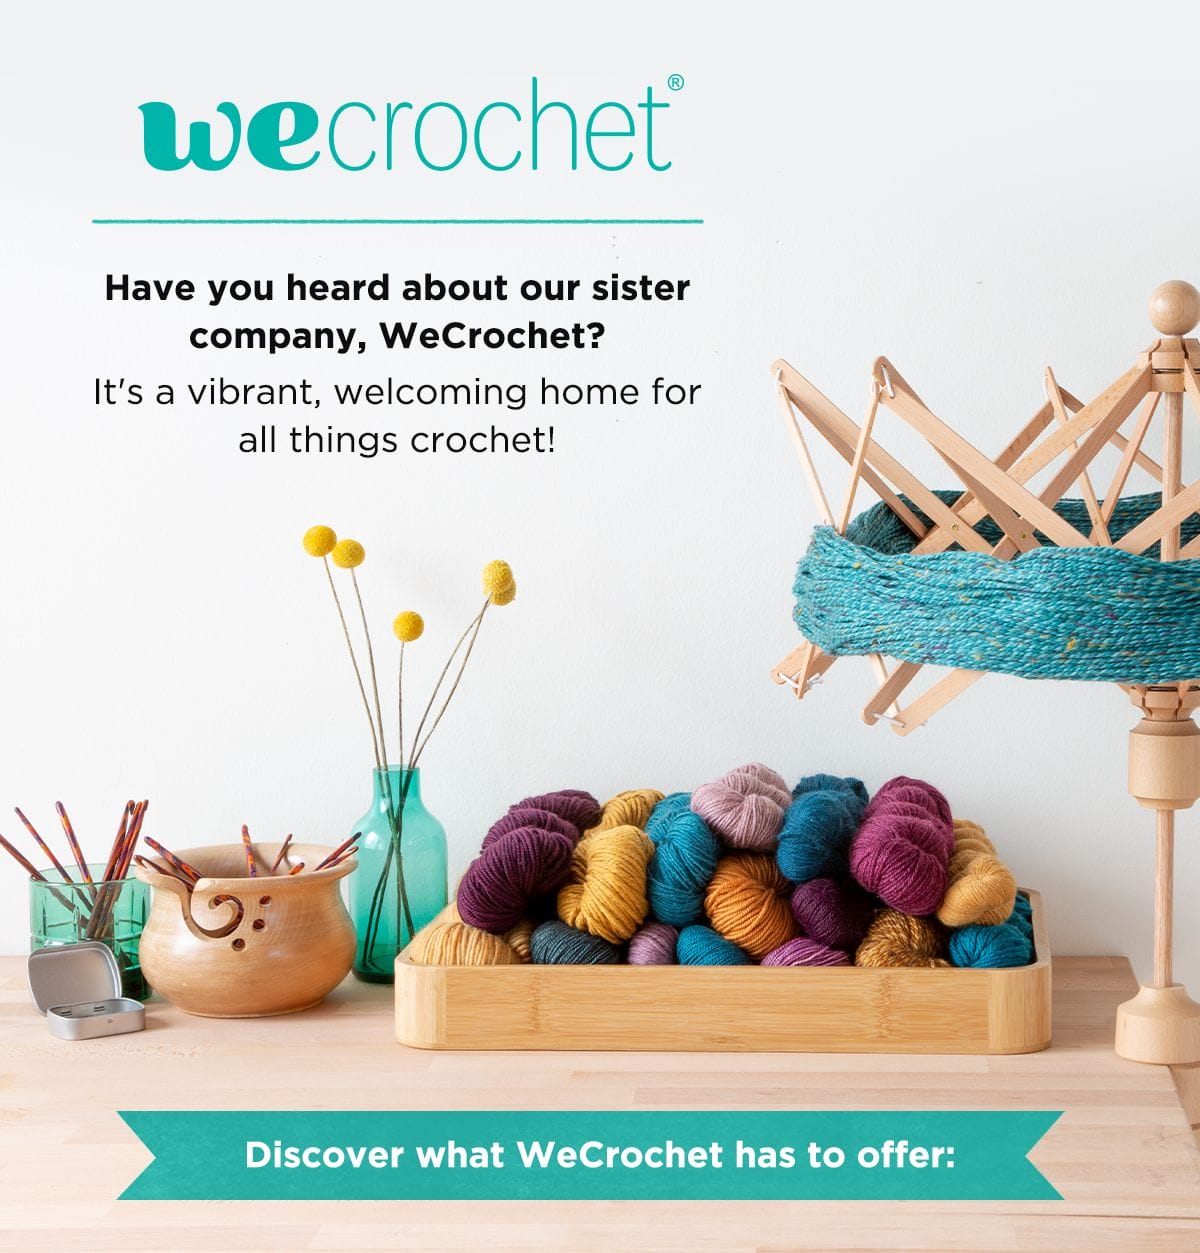 Introducing WeCrochet, your place for all things crochet - The